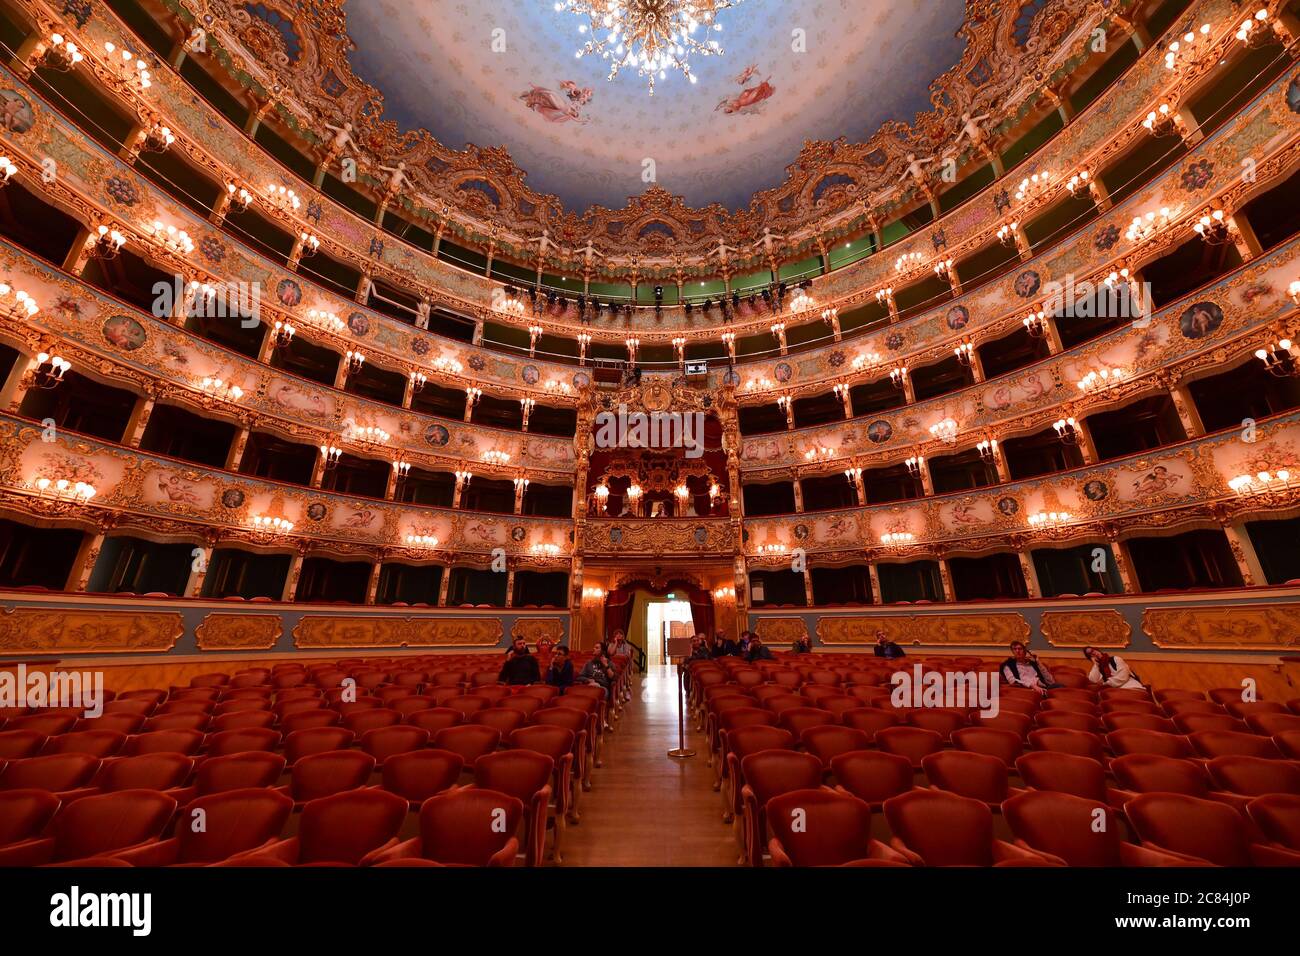 Italy: Venice. Interior of the Teatro La Fenice (The Phoenix), an opera house built in the XVIIIth century in neo-classical style Stock Photo